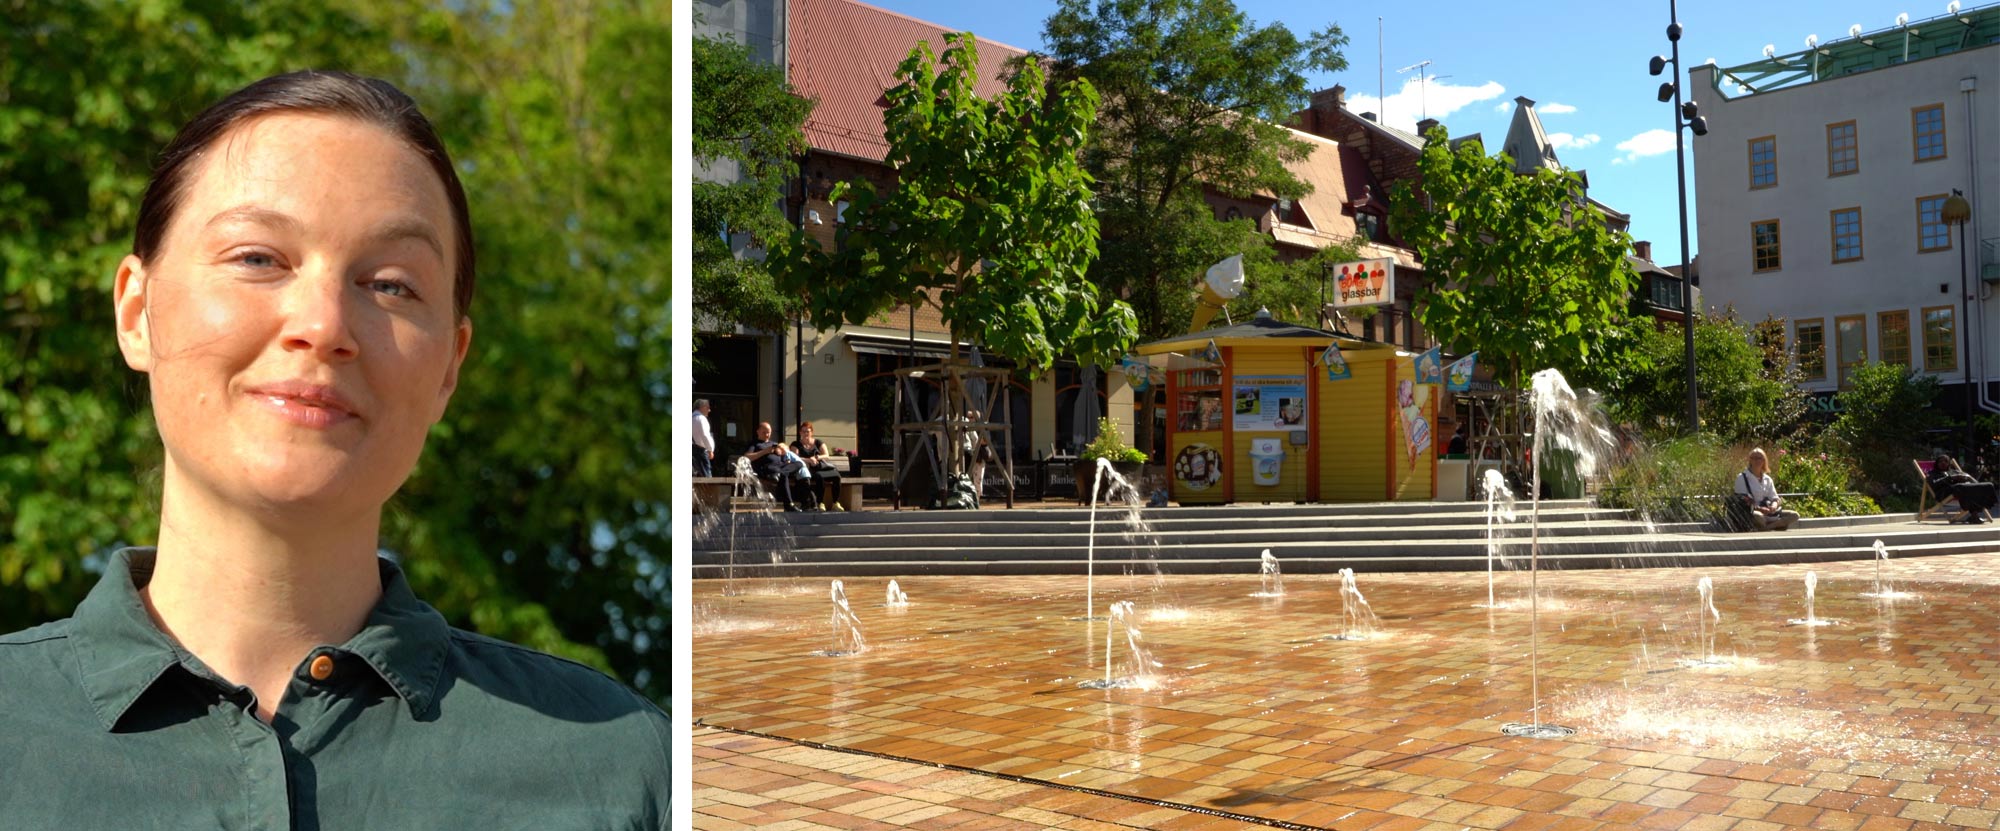 Two pictures, one of Märit Jansson and one of a fountain on a square. Around it there are people sitting. In the background there is an icecream parlour.